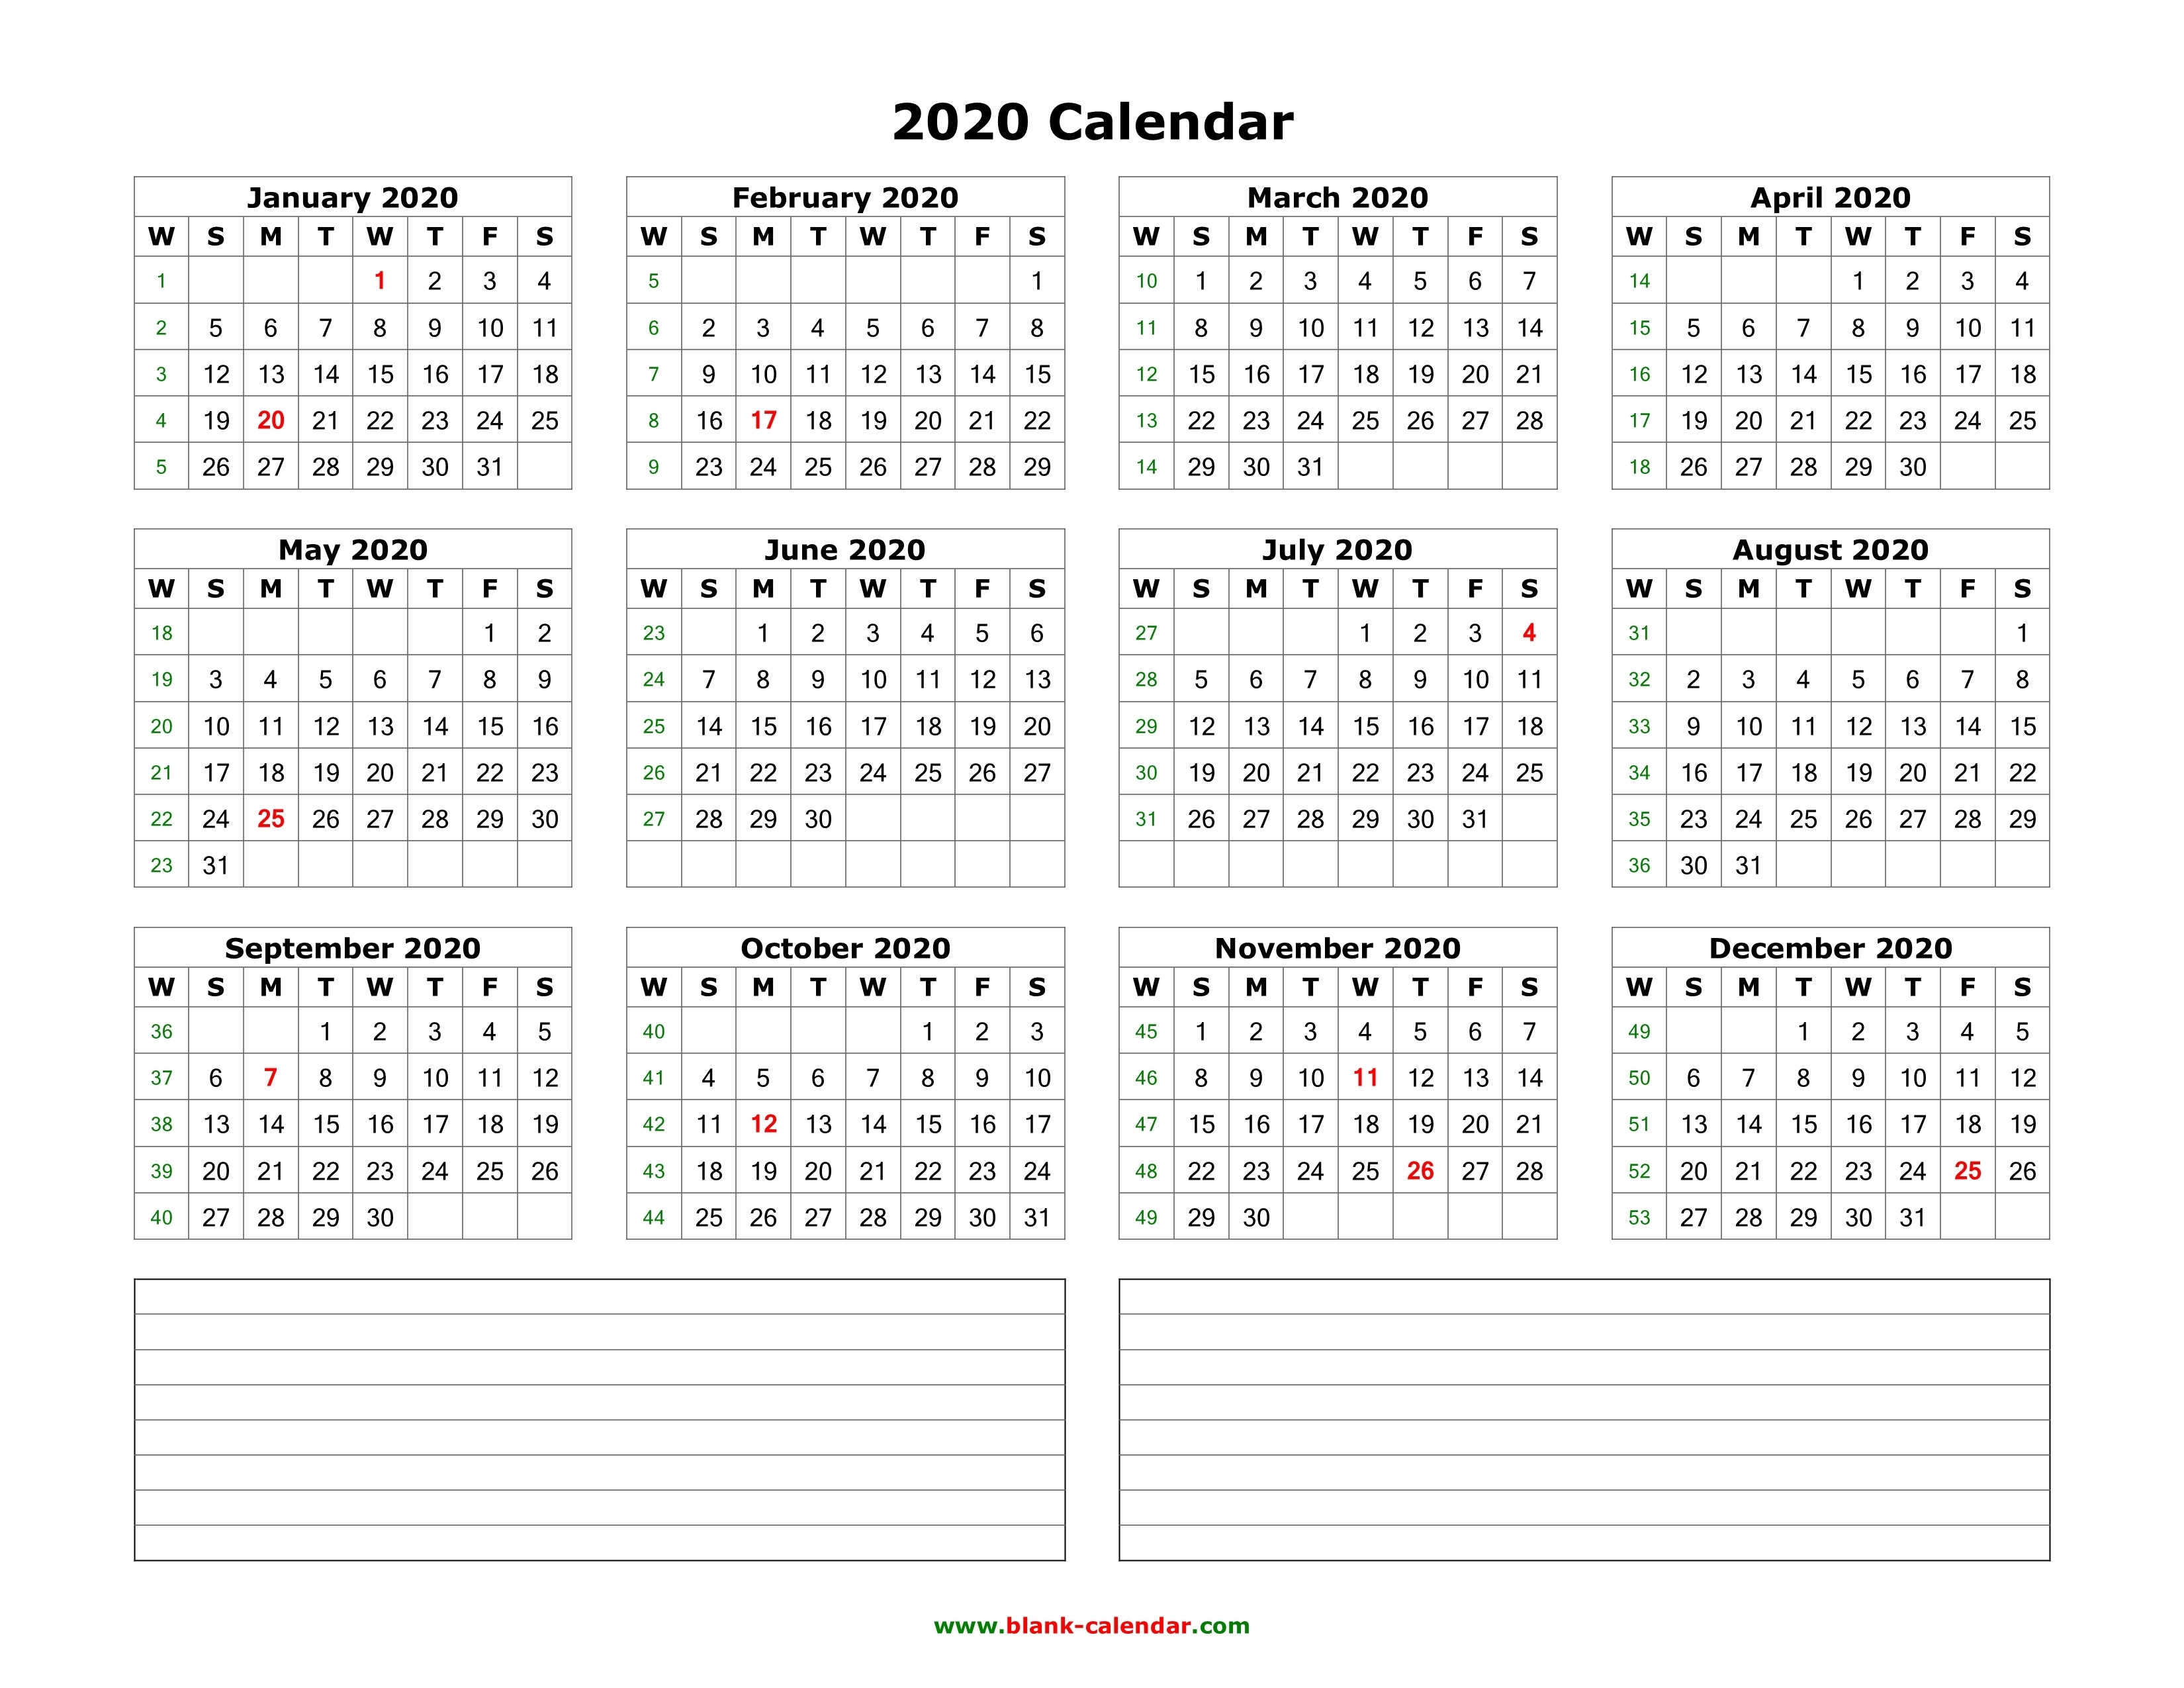 Download Blank Calendar 2020 With Space For Notes (12 Months Calendar Template With Notes